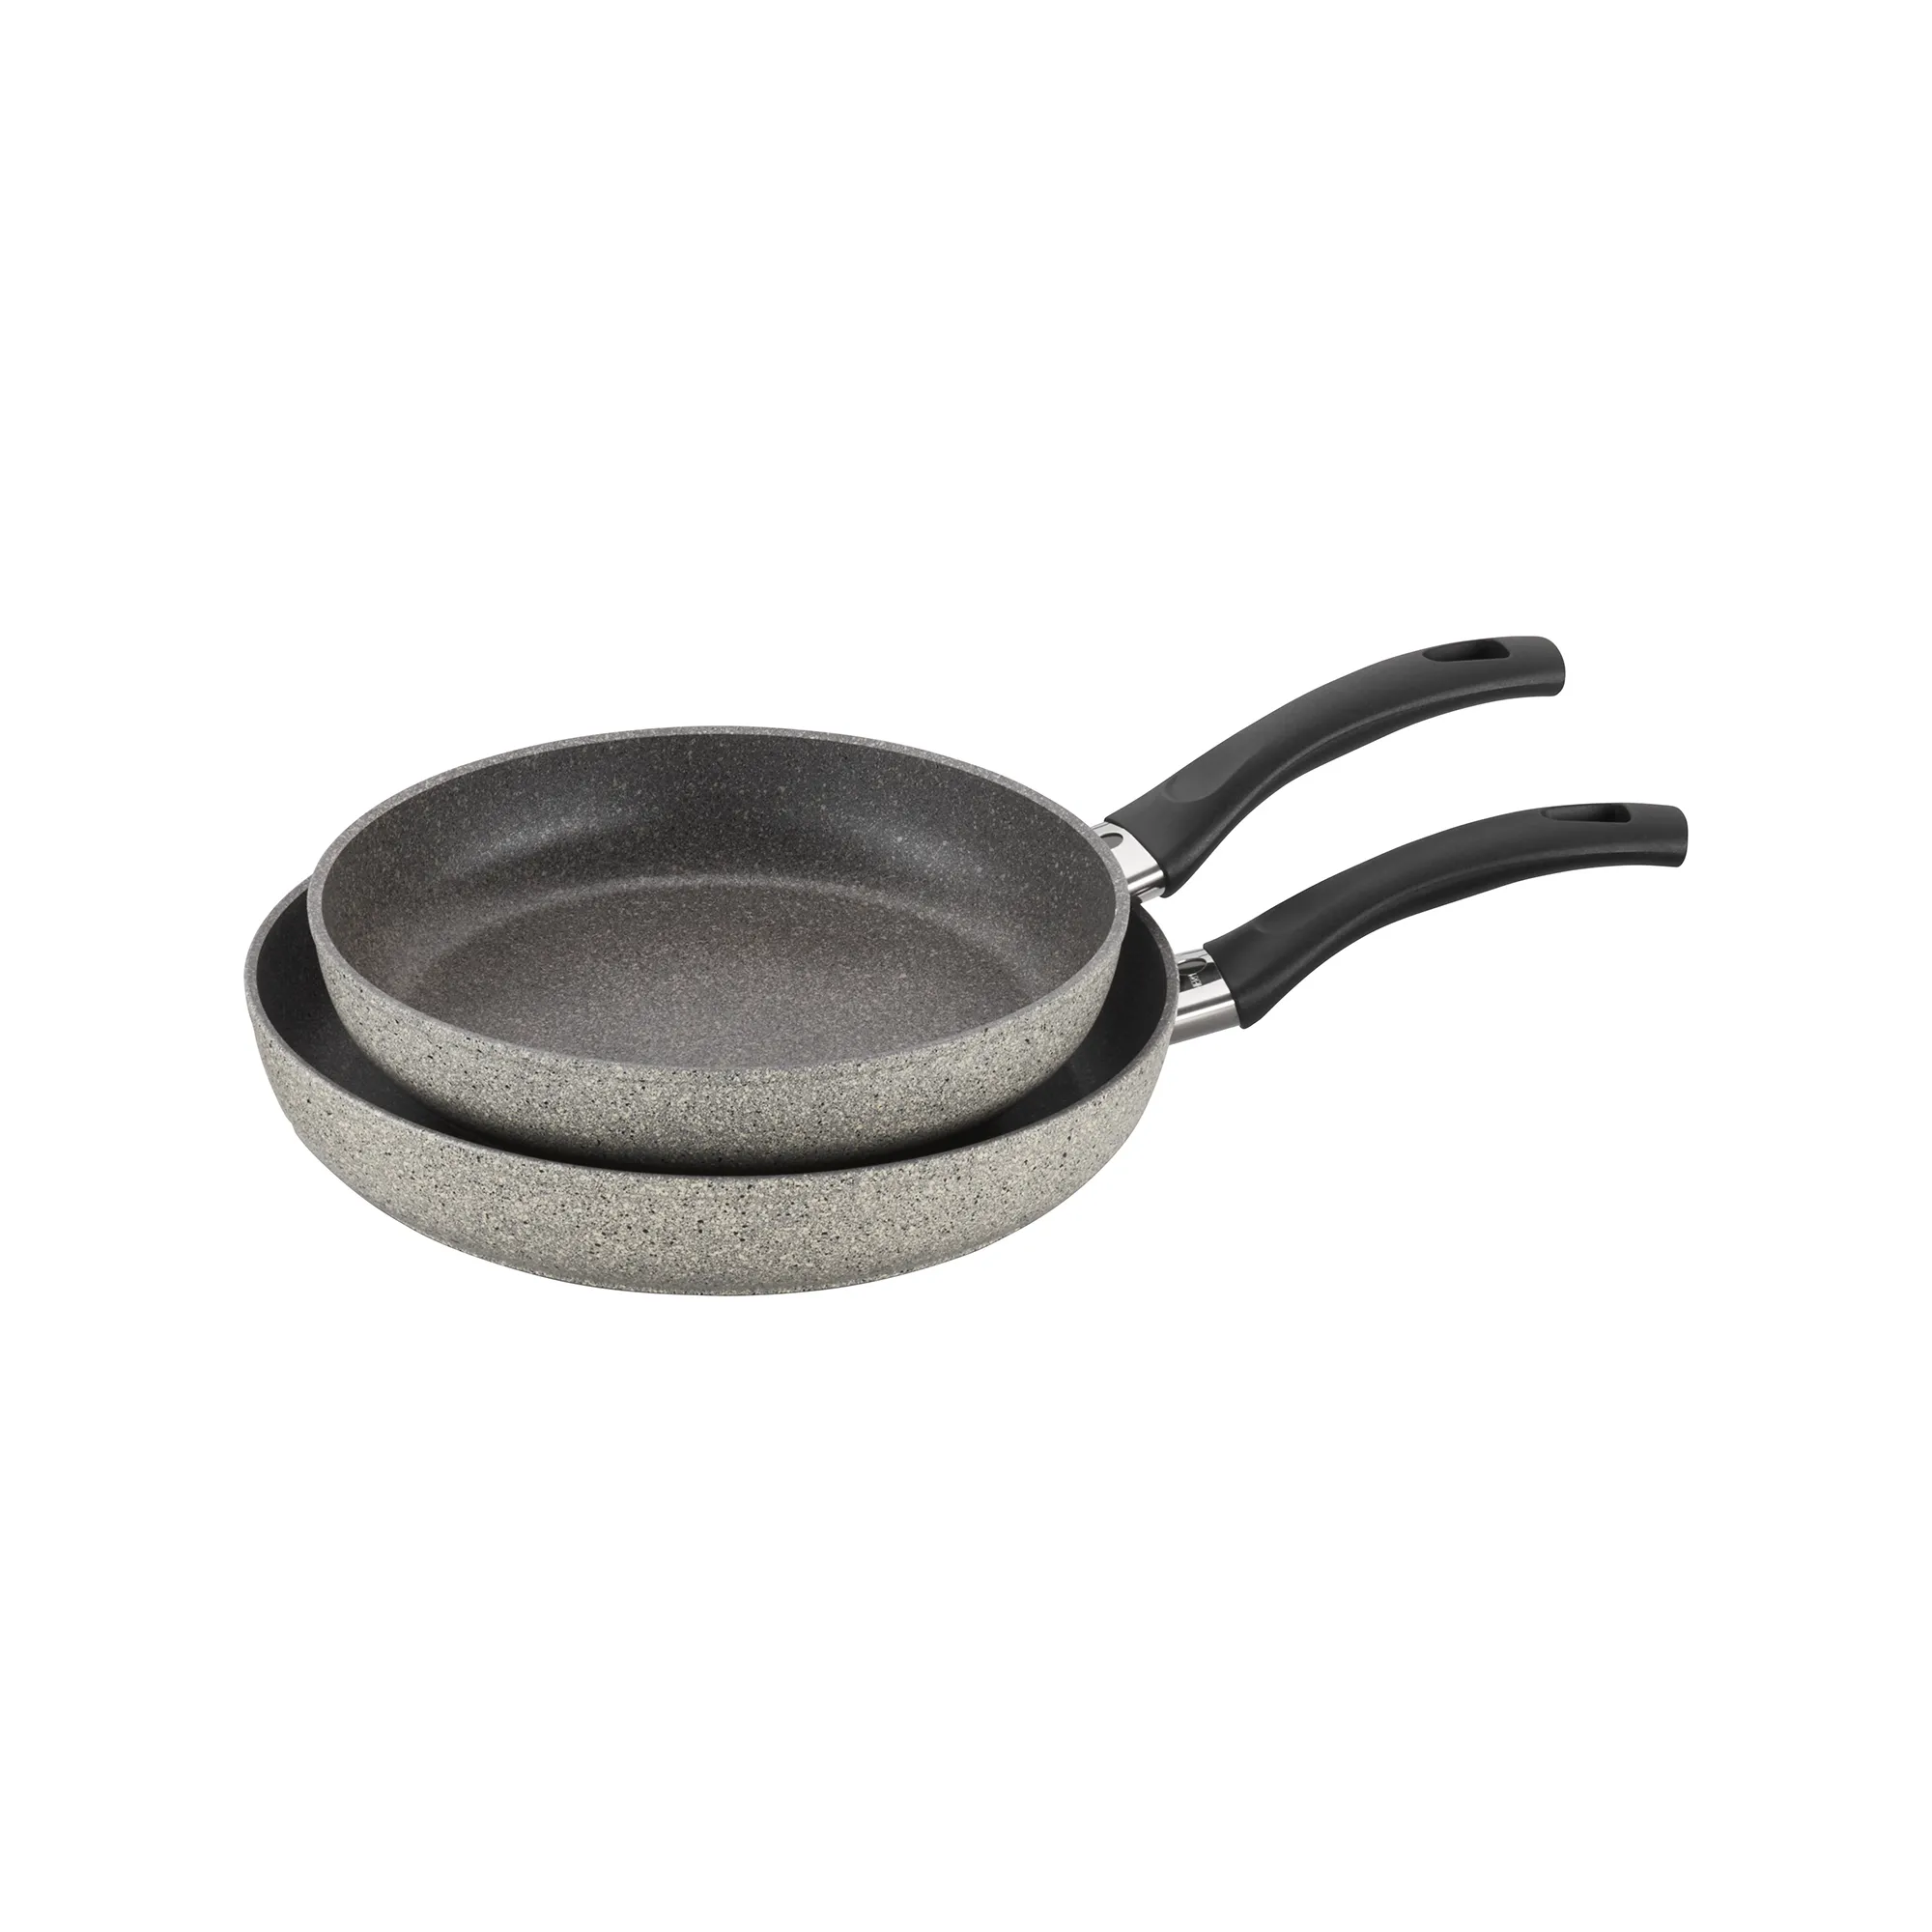 https://www.homethreads.com/files/zwilling/75001-651-ballarini-parma-by-henckels-forged-aluminum-nonstick-fry-pan-set-2-piece-granite-made-in-italy.webp